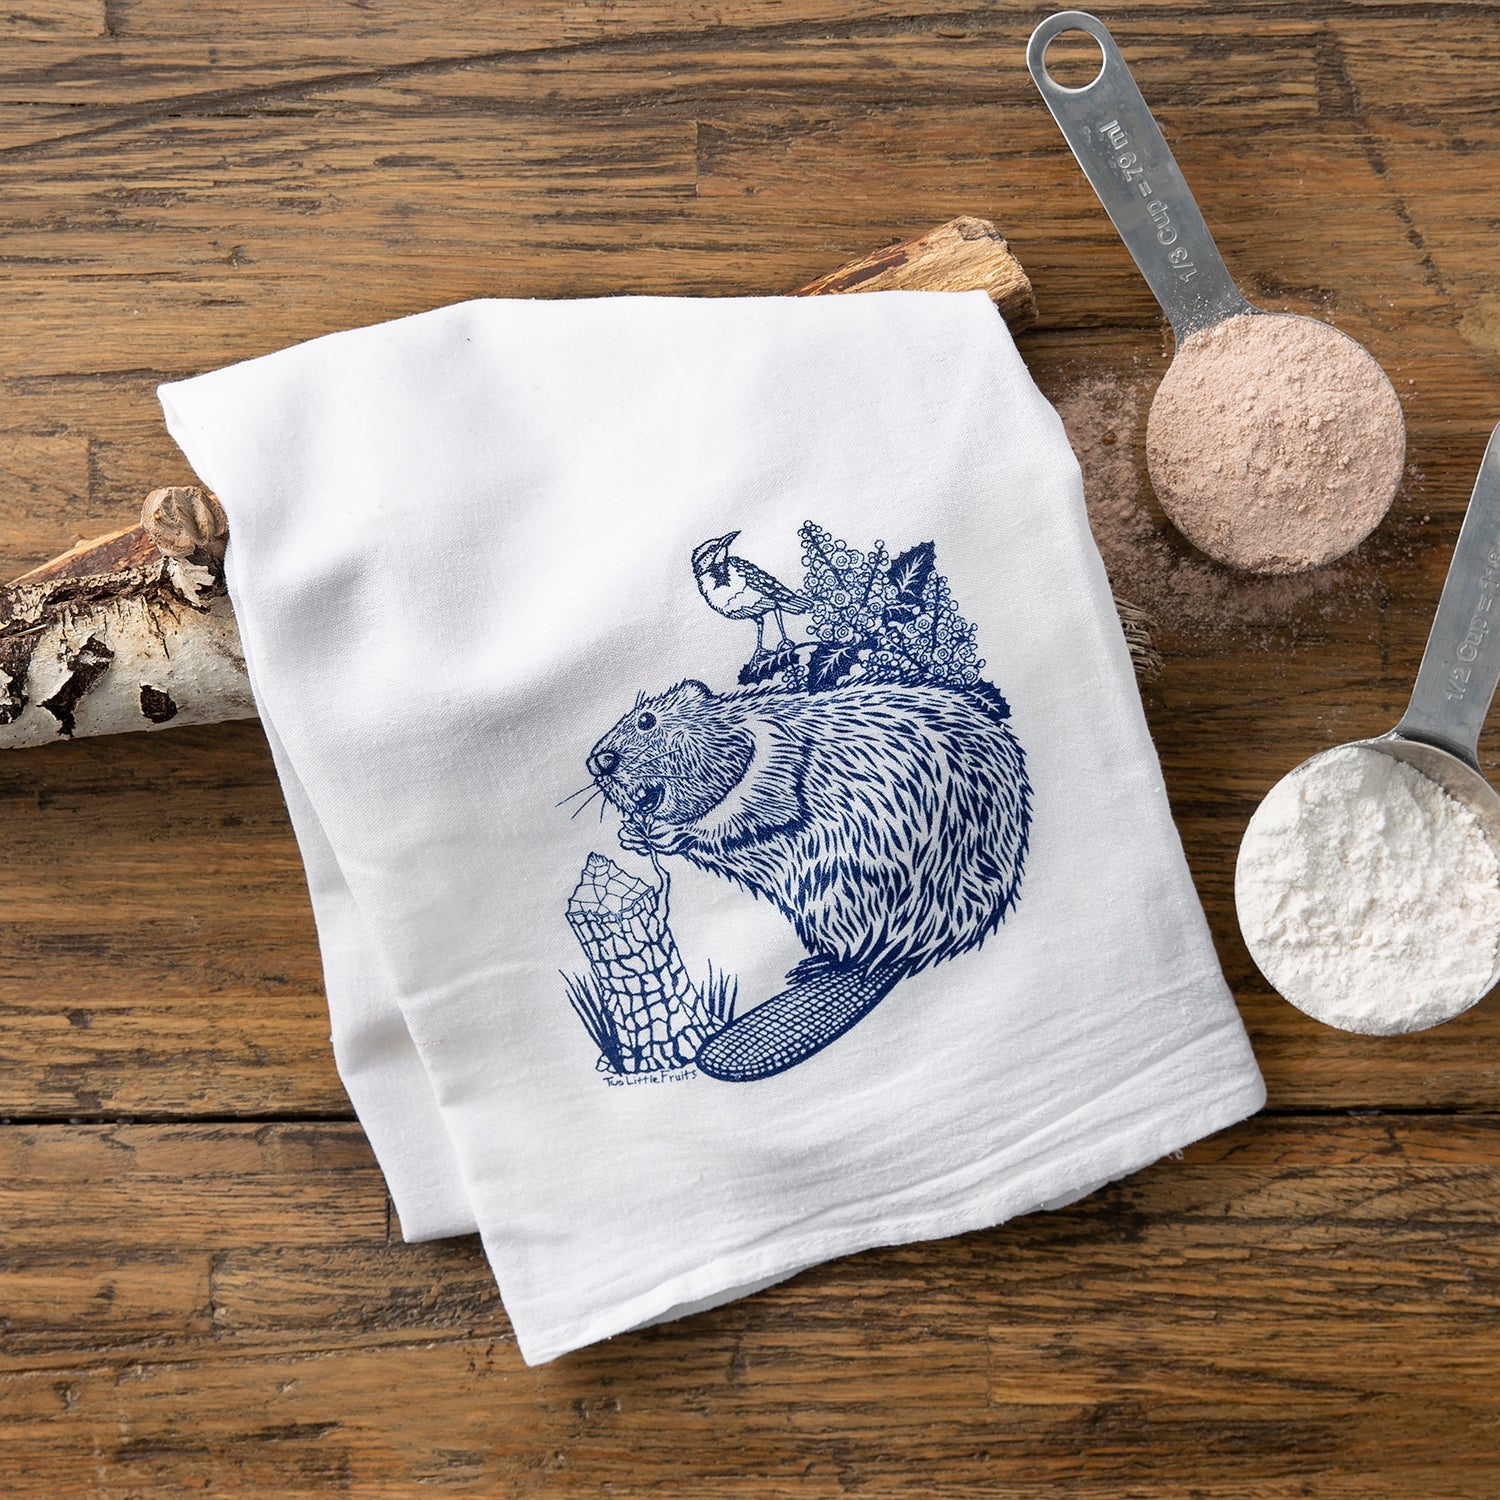 Bison and Grizzly Bear Kitchen Towel Set - Two Little Fruits